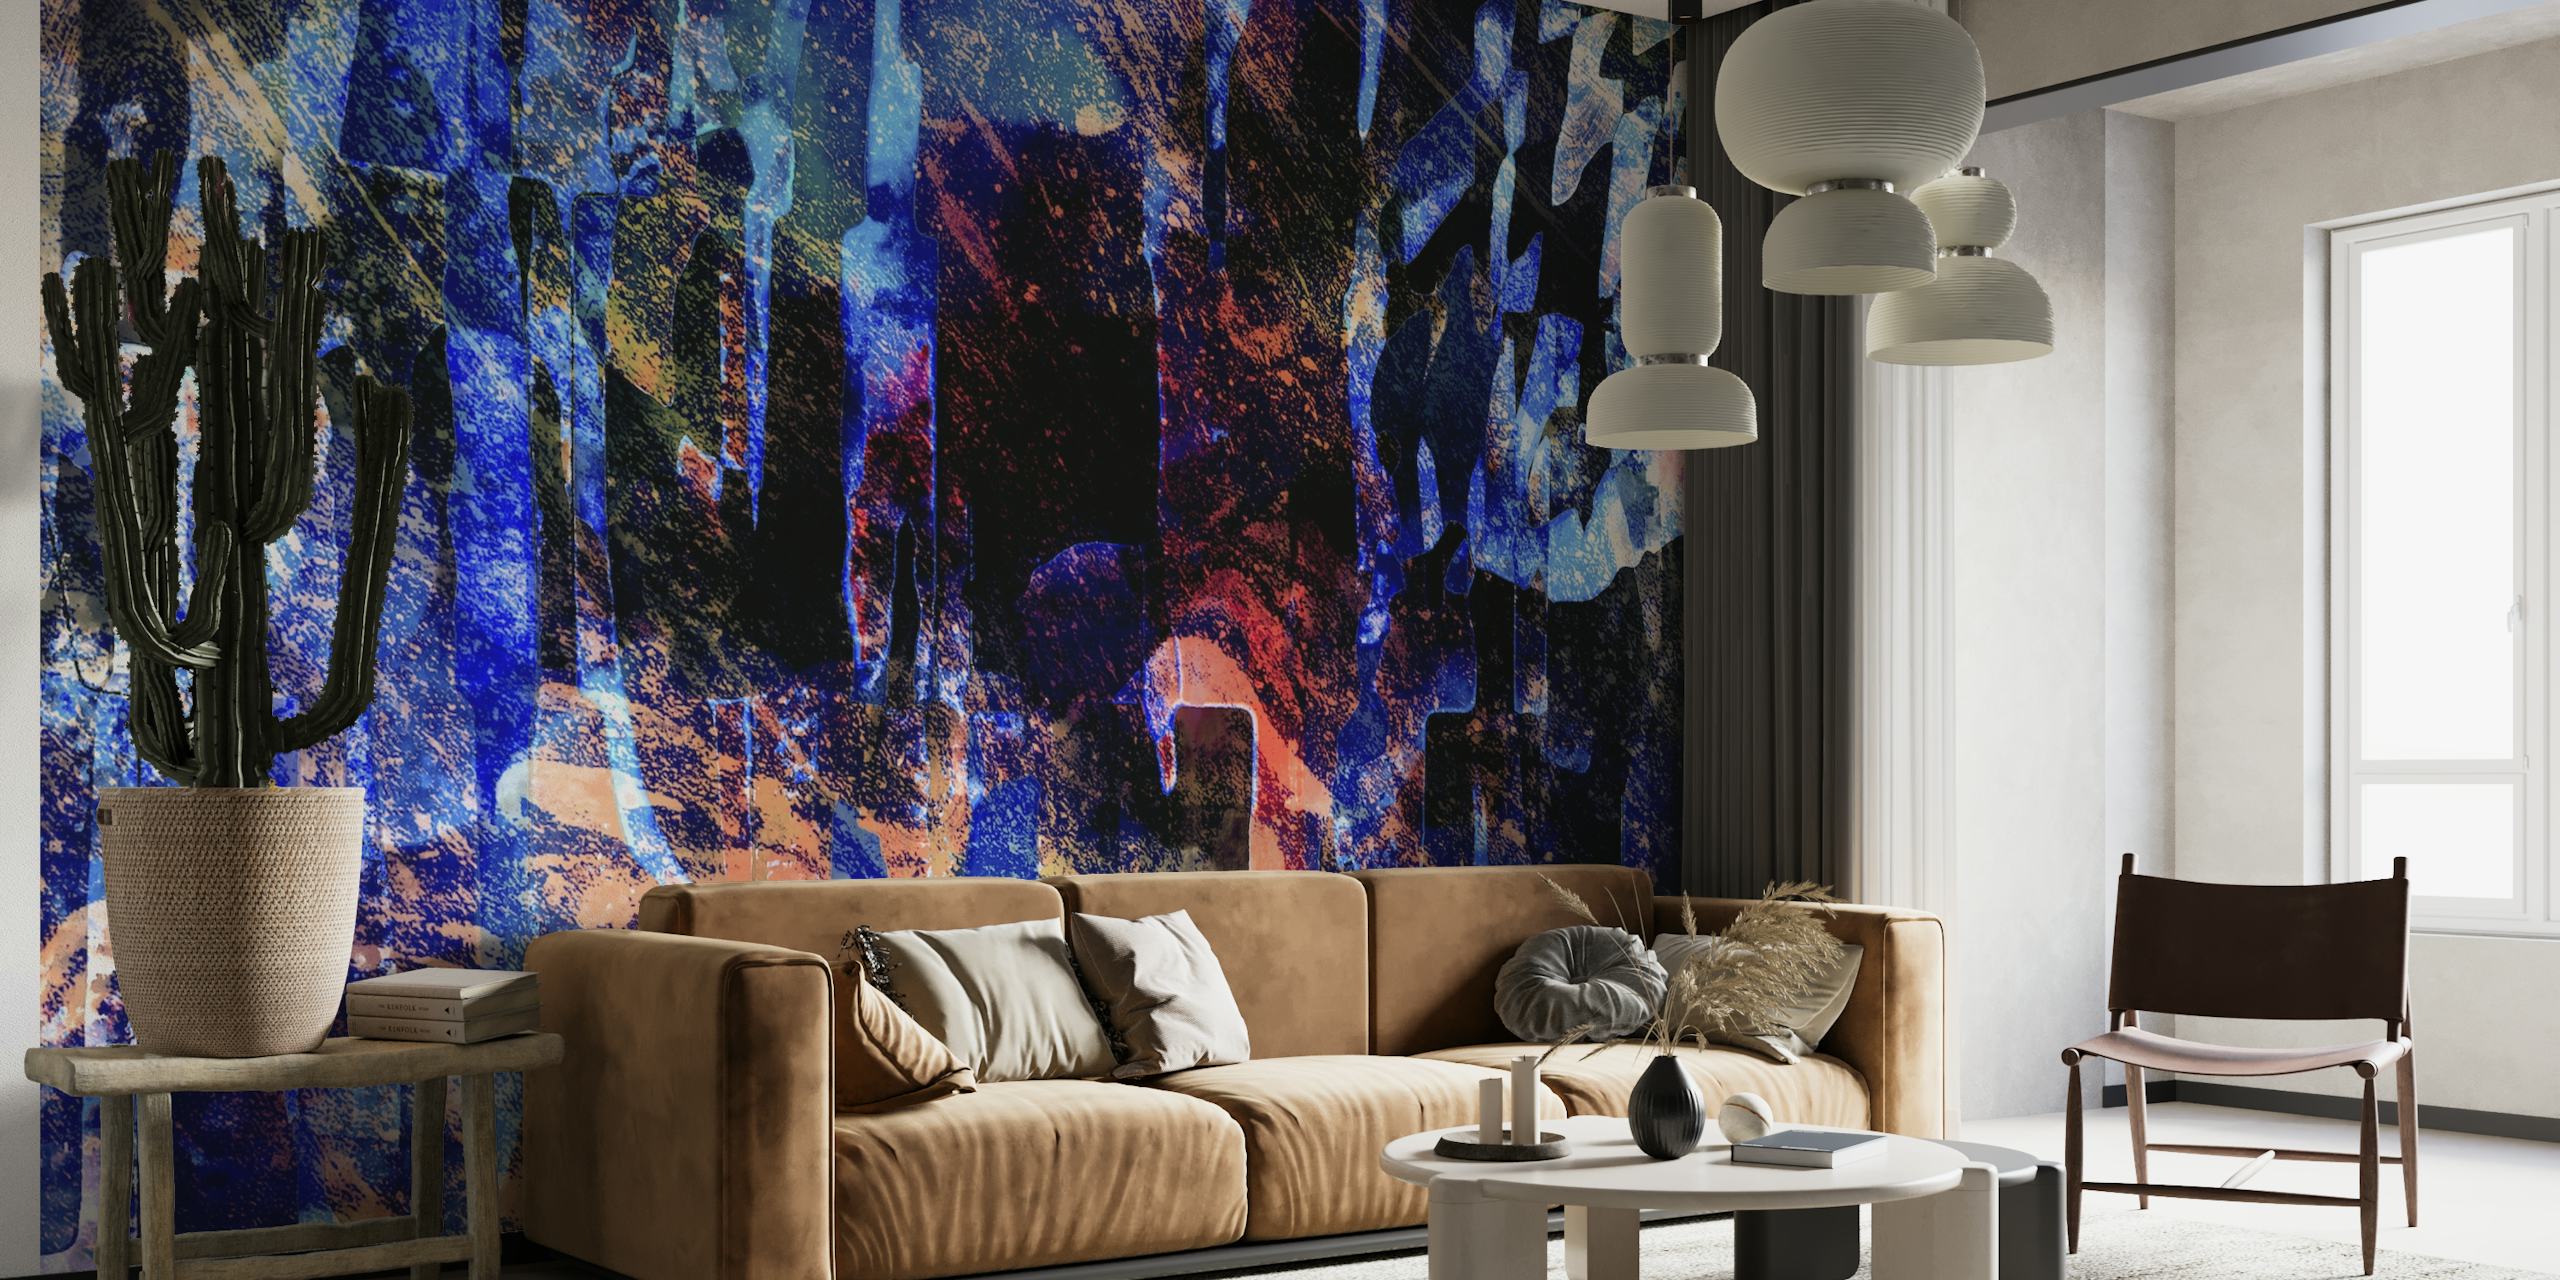 Night Dye Abstract wall mural with a blend of deep blues and warm colors in a modern artistic design